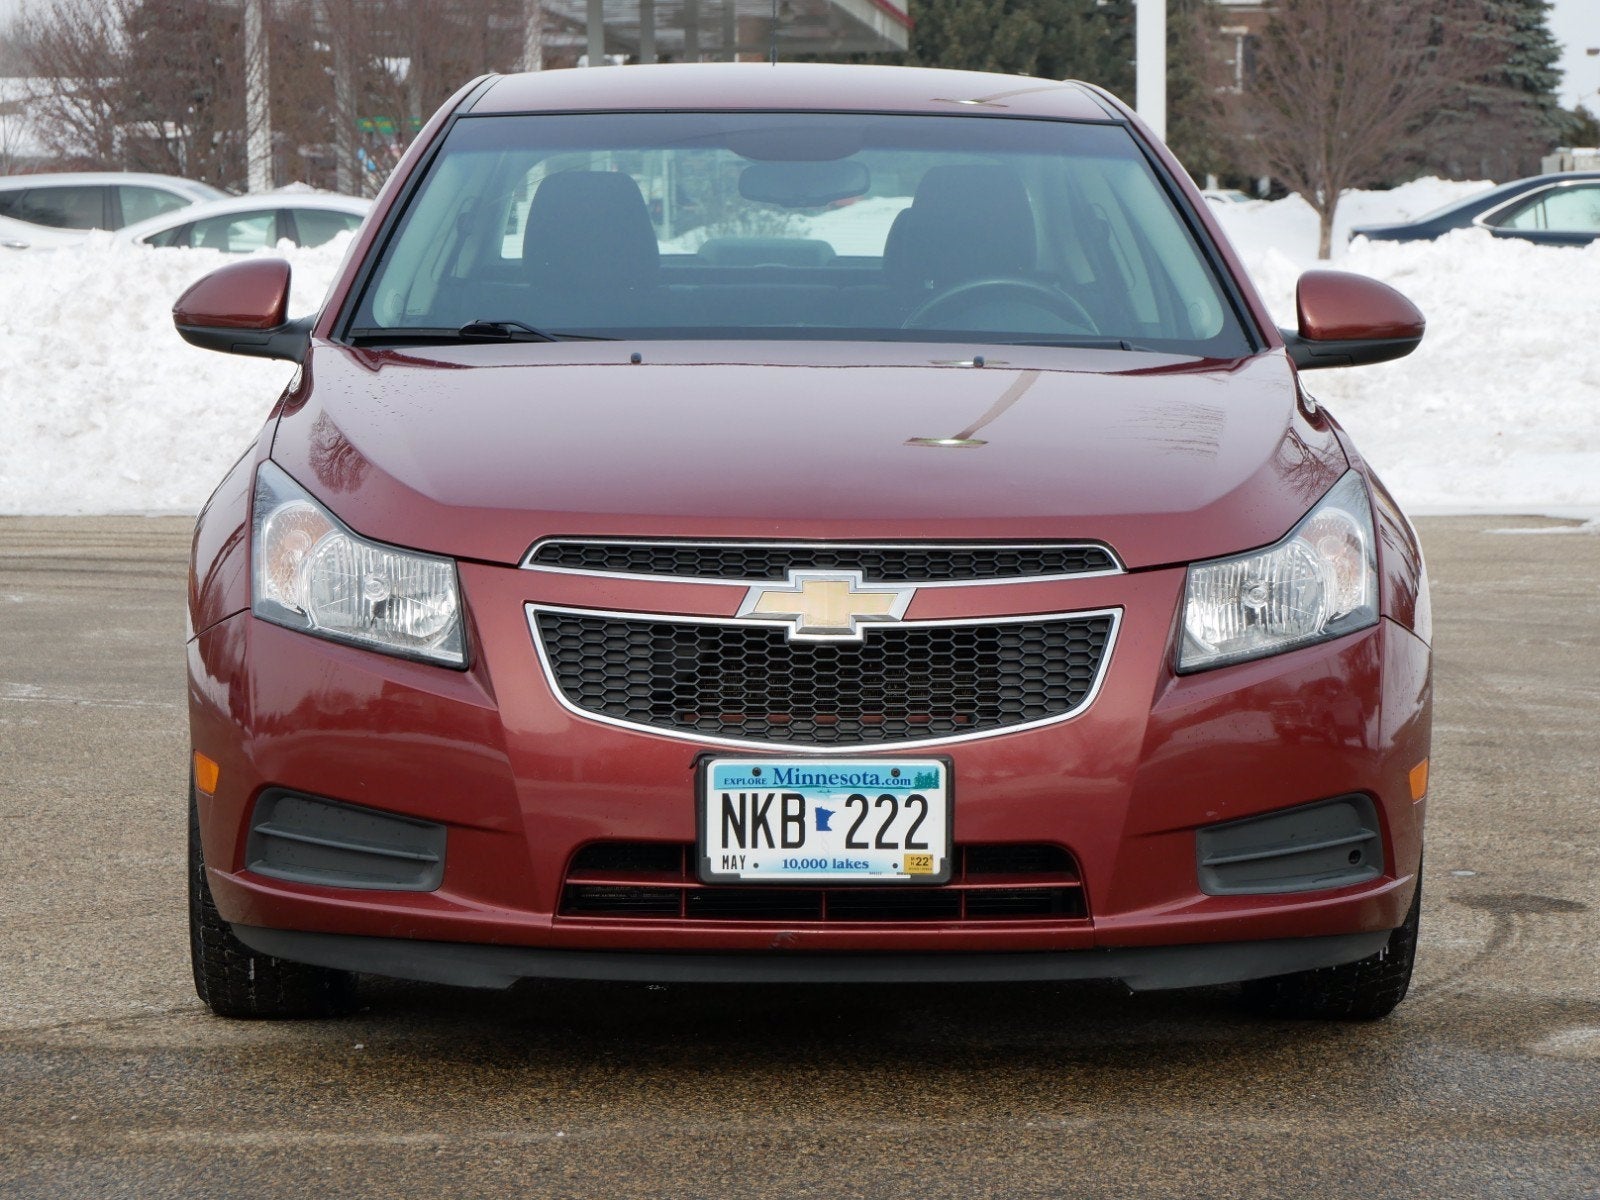 Used 2012 Chevrolet Cruze 1LT with VIN 1G1PF5SC1C7290495 for sale in Apple Valley, Minnesota